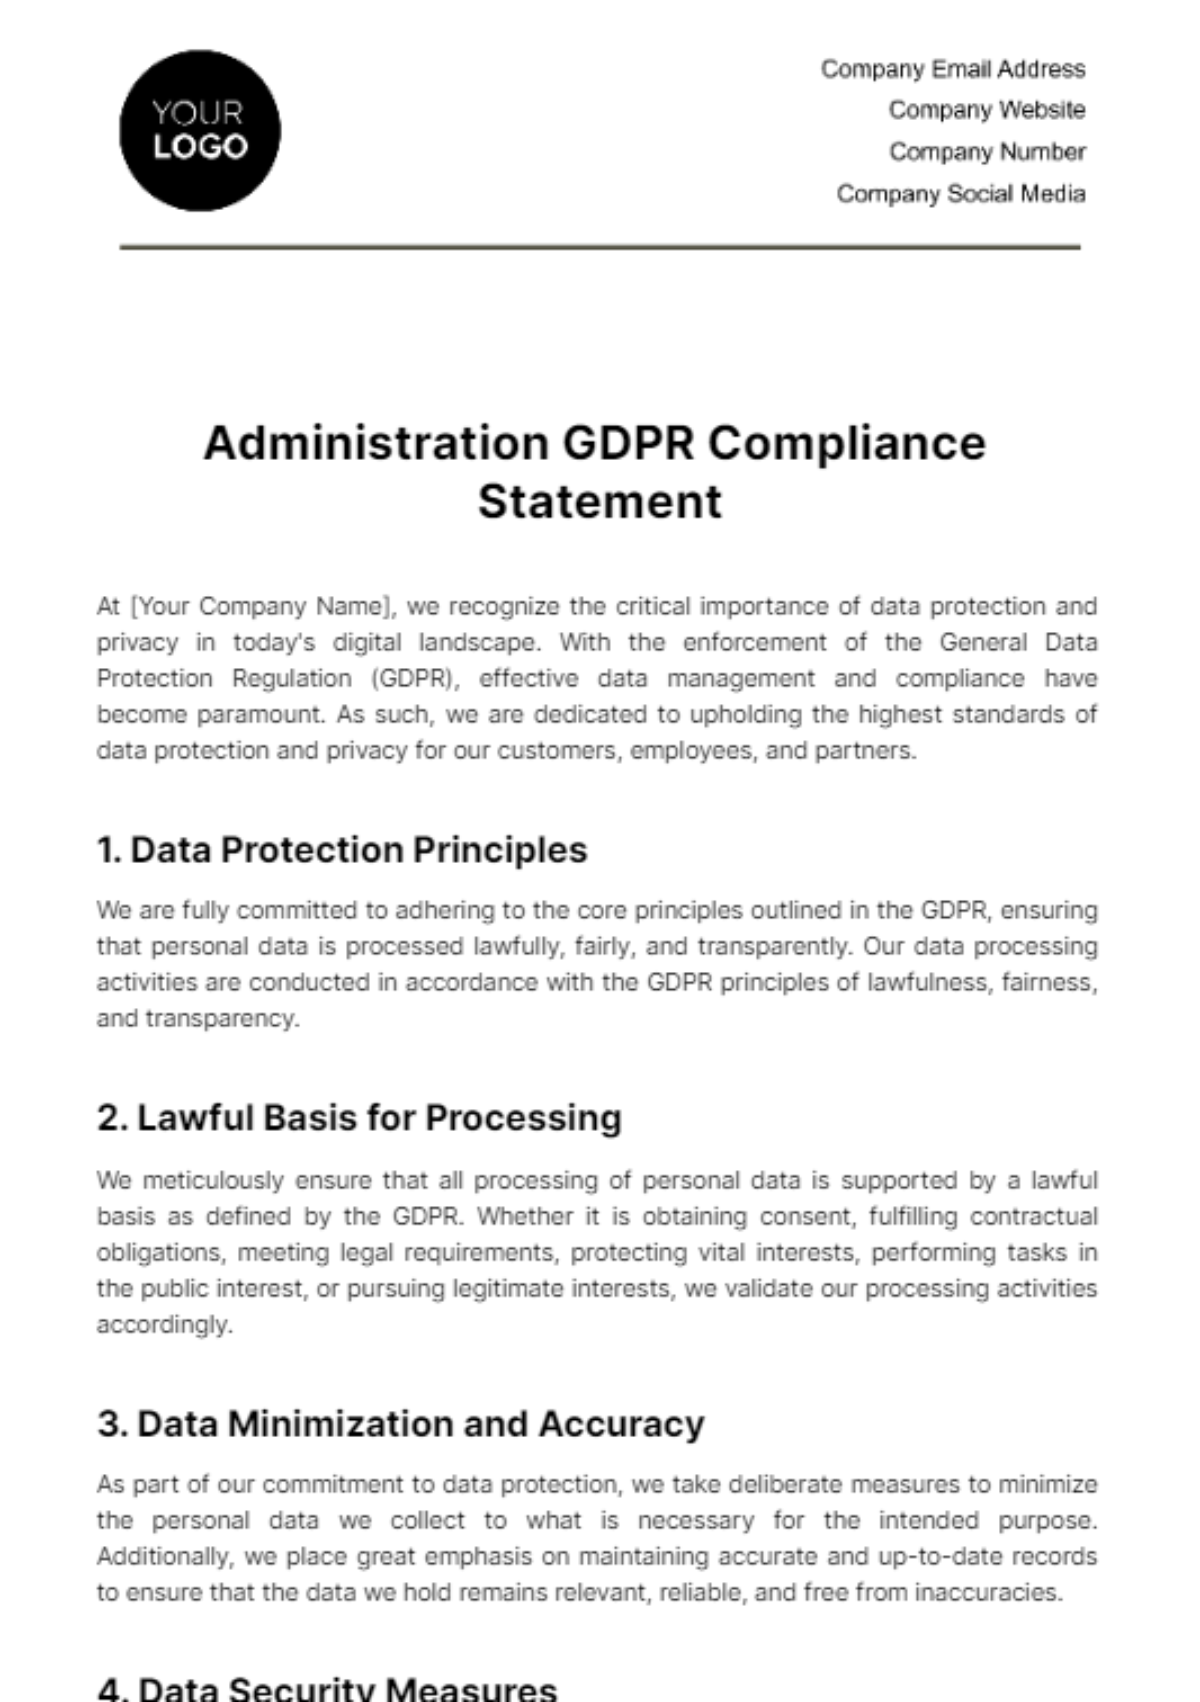 Administration GDPR Compliance Statement Template